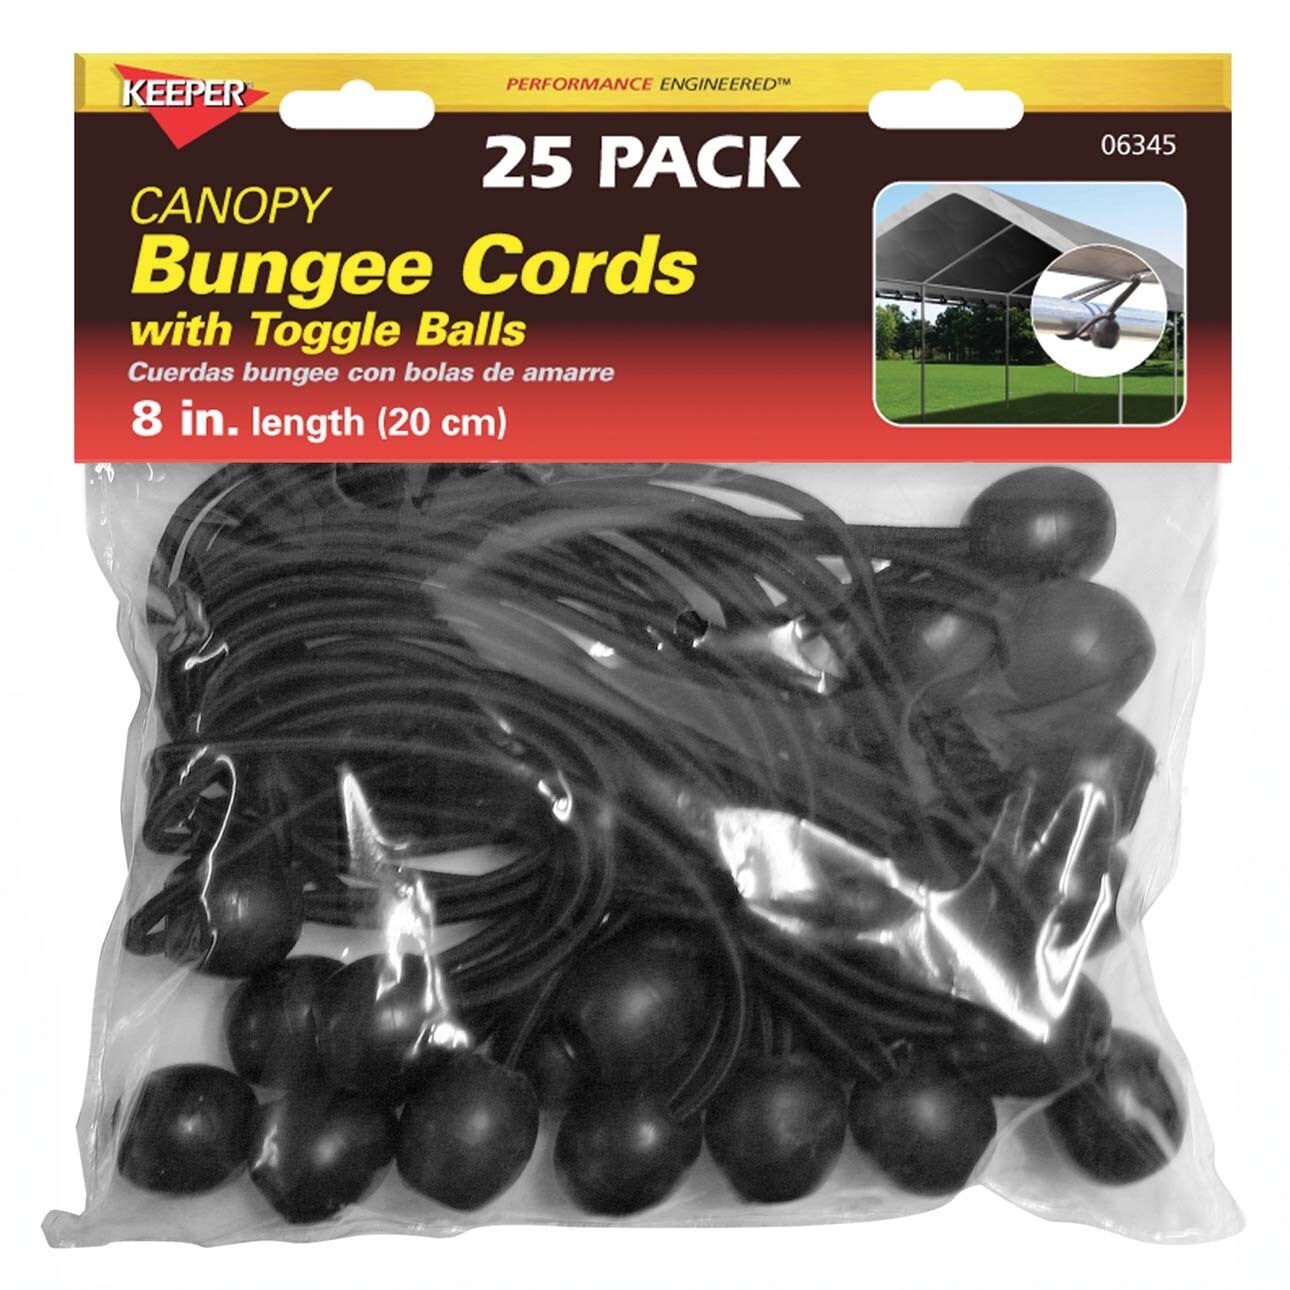 8 inch bungee cords